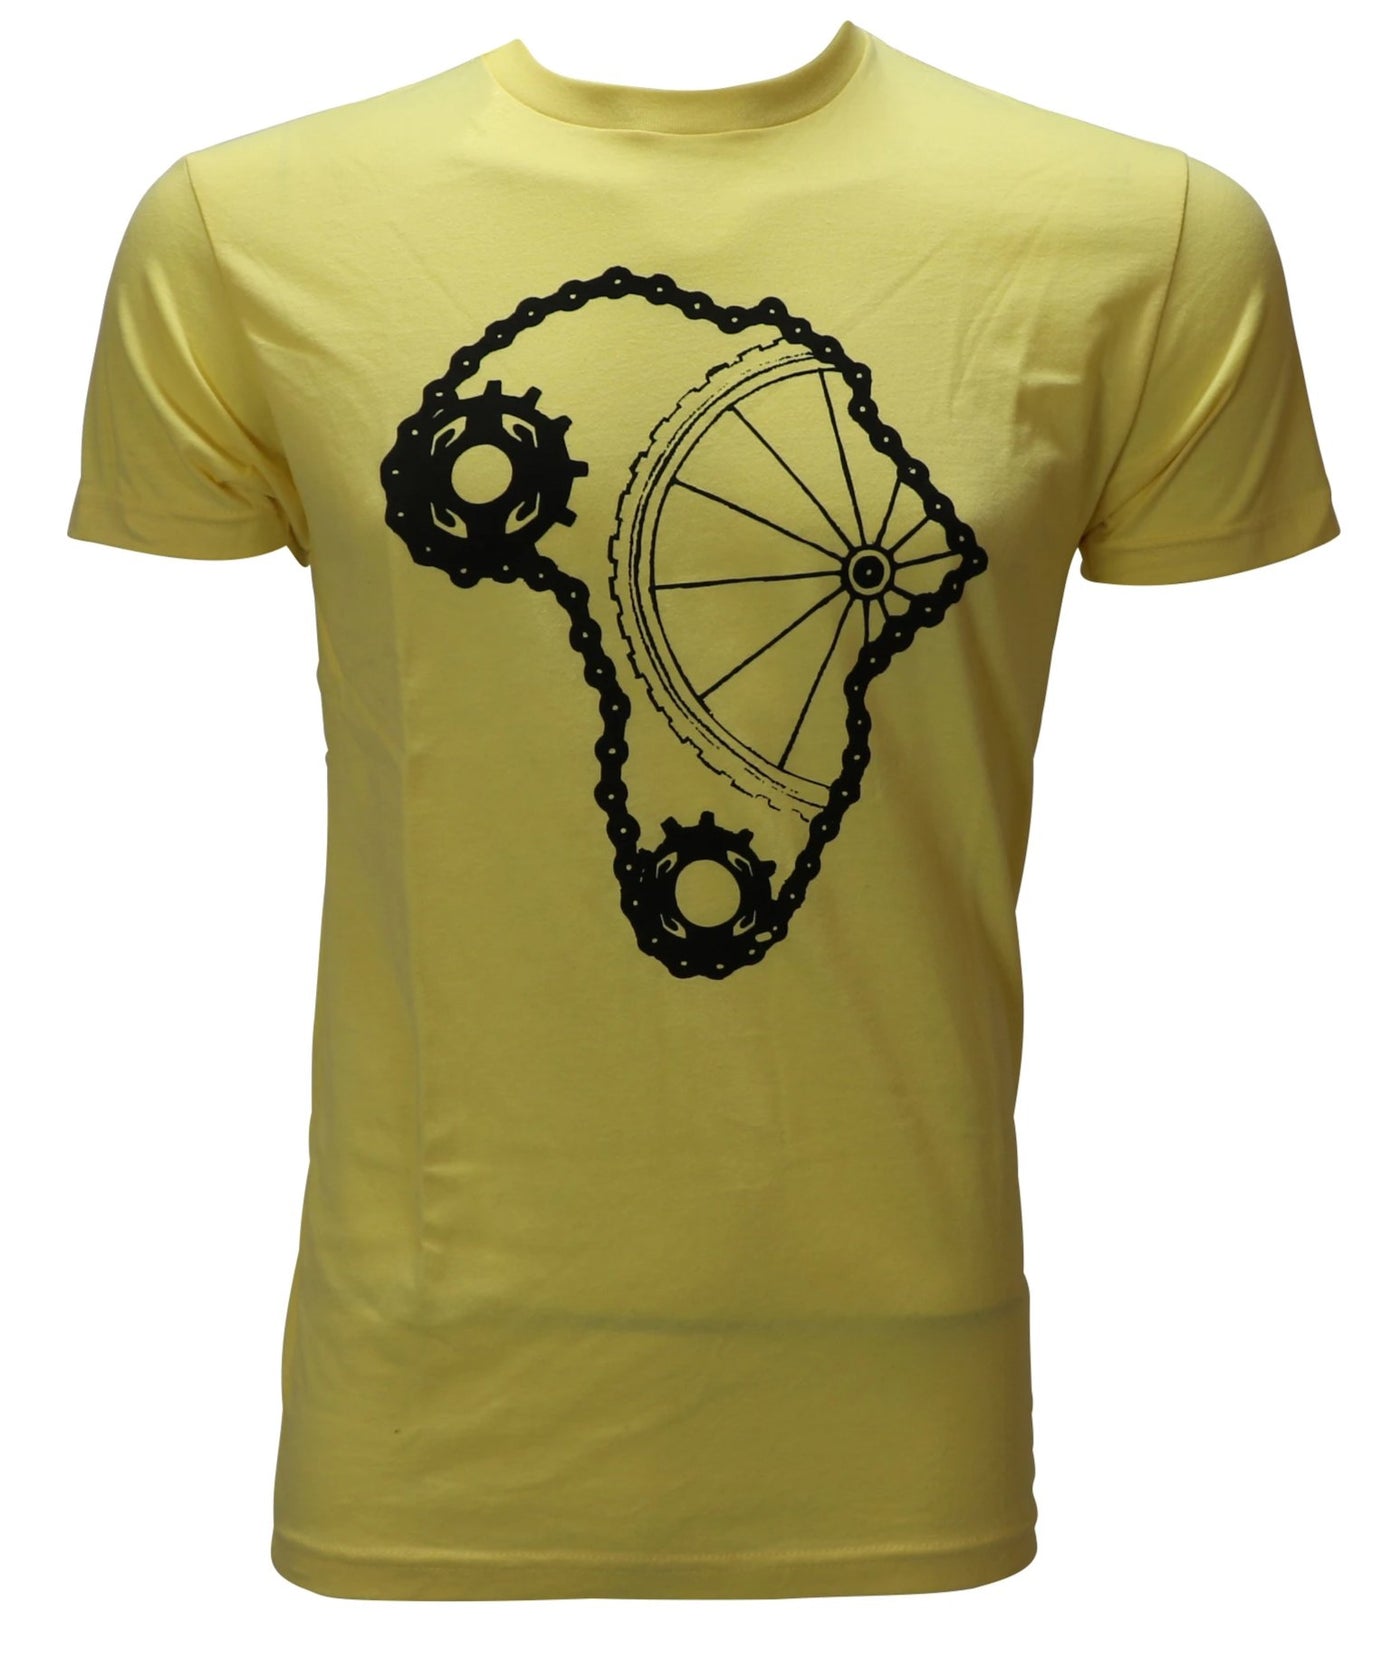 Mike's Bikes Africa T-Shirt